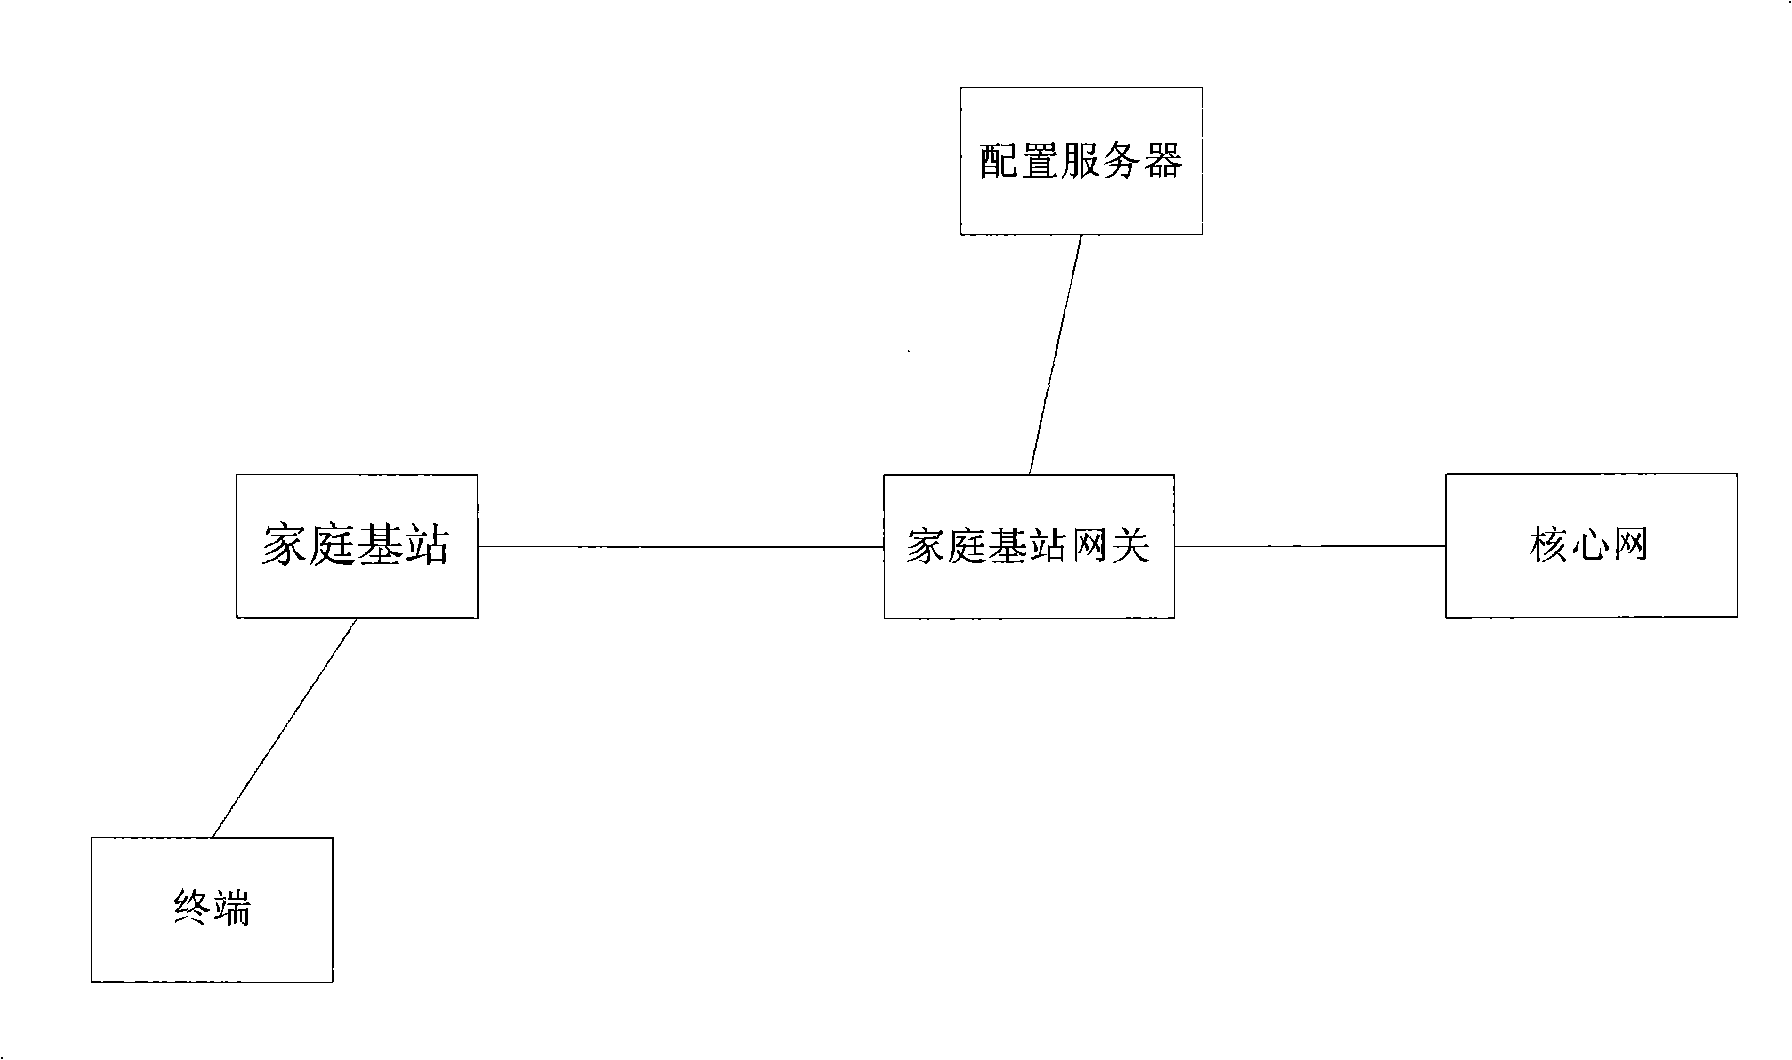 Method for configuring and displaying name of household base station, and name of internal customer group